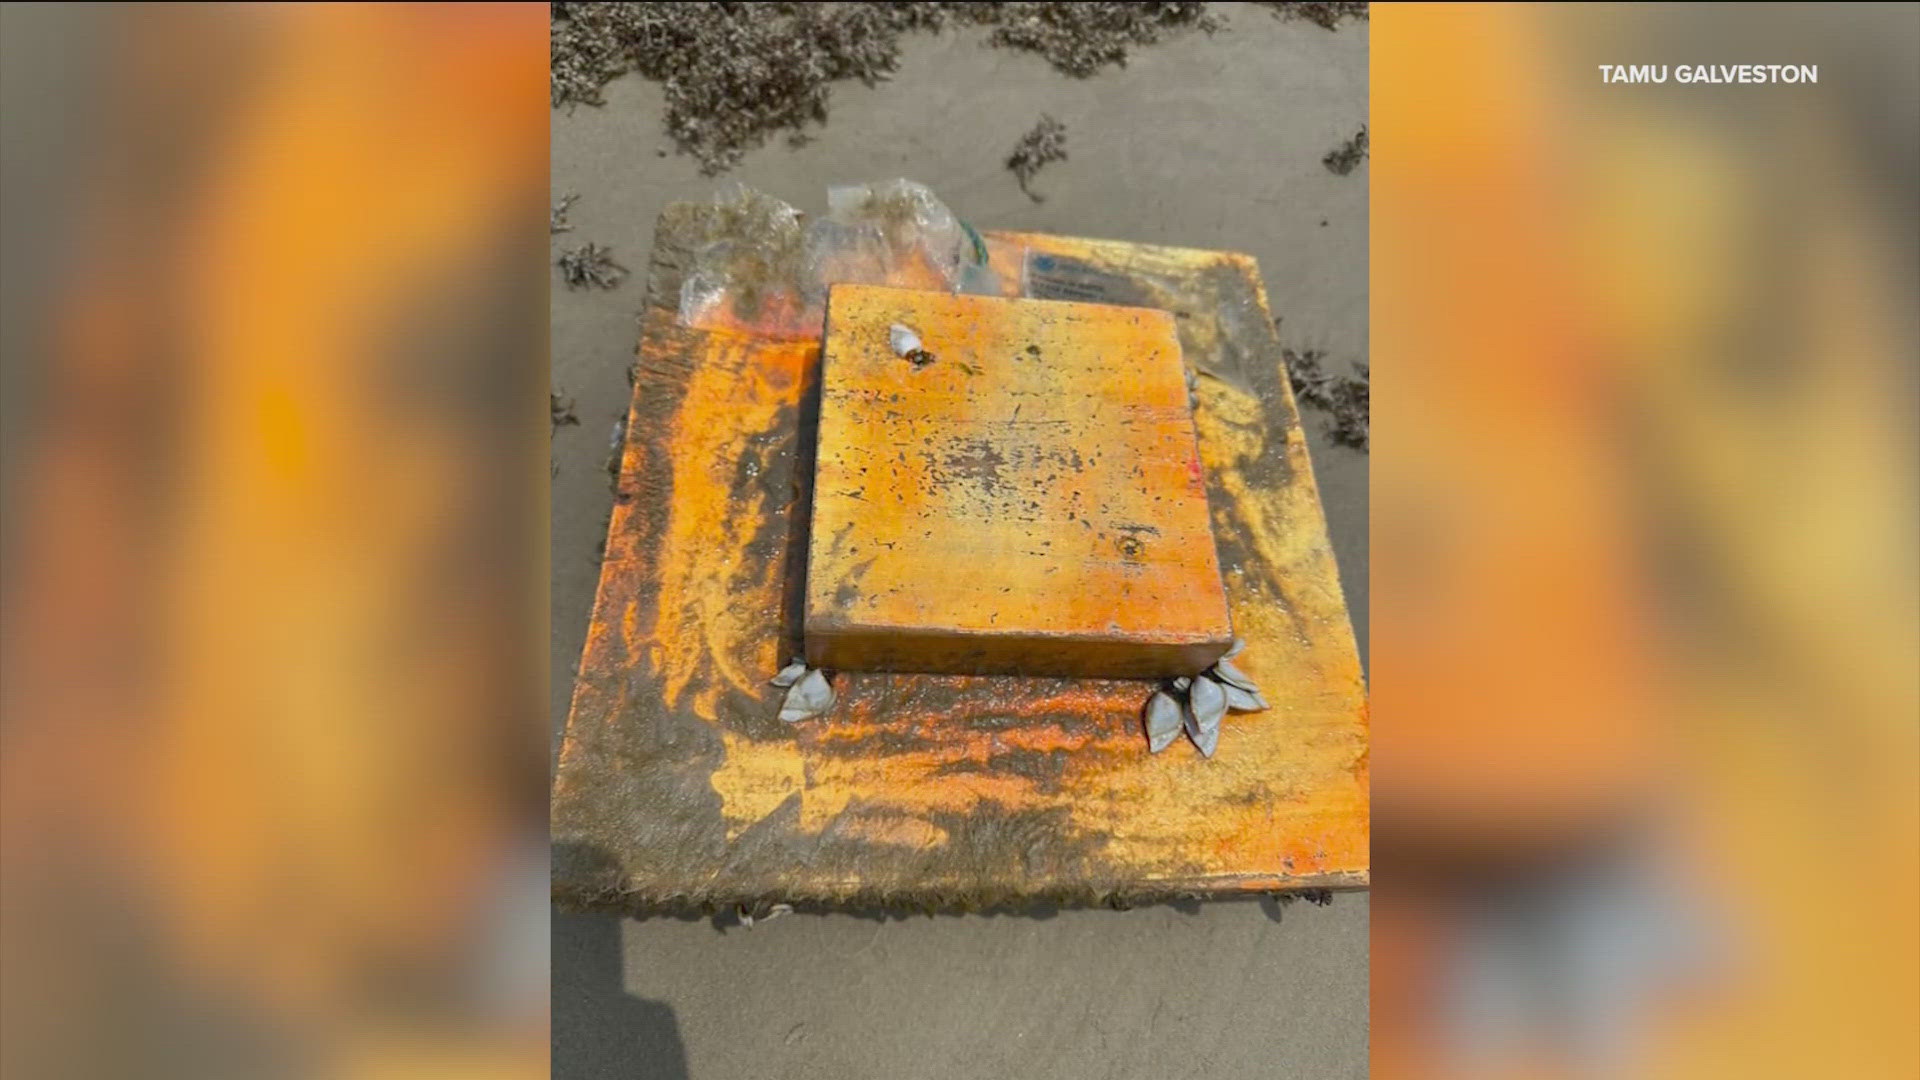 These orange wooden blocks, equipped with GPS satellite tracking capability, have been found washed up on some southeast Texas shores.